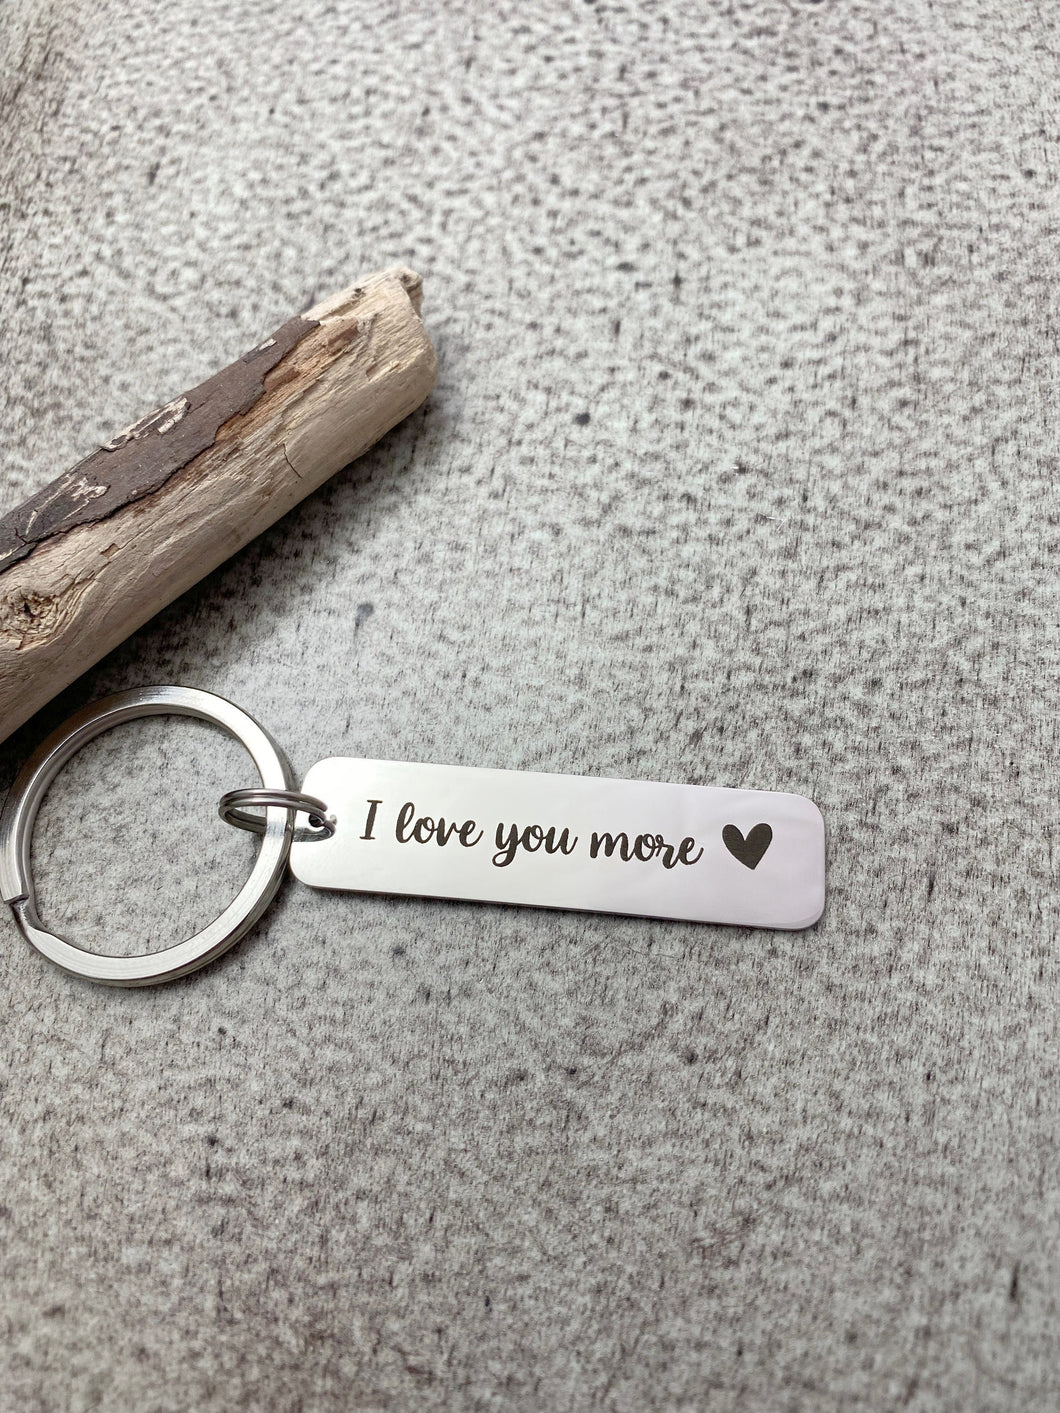 I love you more keychain with heart - Stainless steel engraved Key ring - Gift for Him - Valentine's Day gift for boyfriend or husband